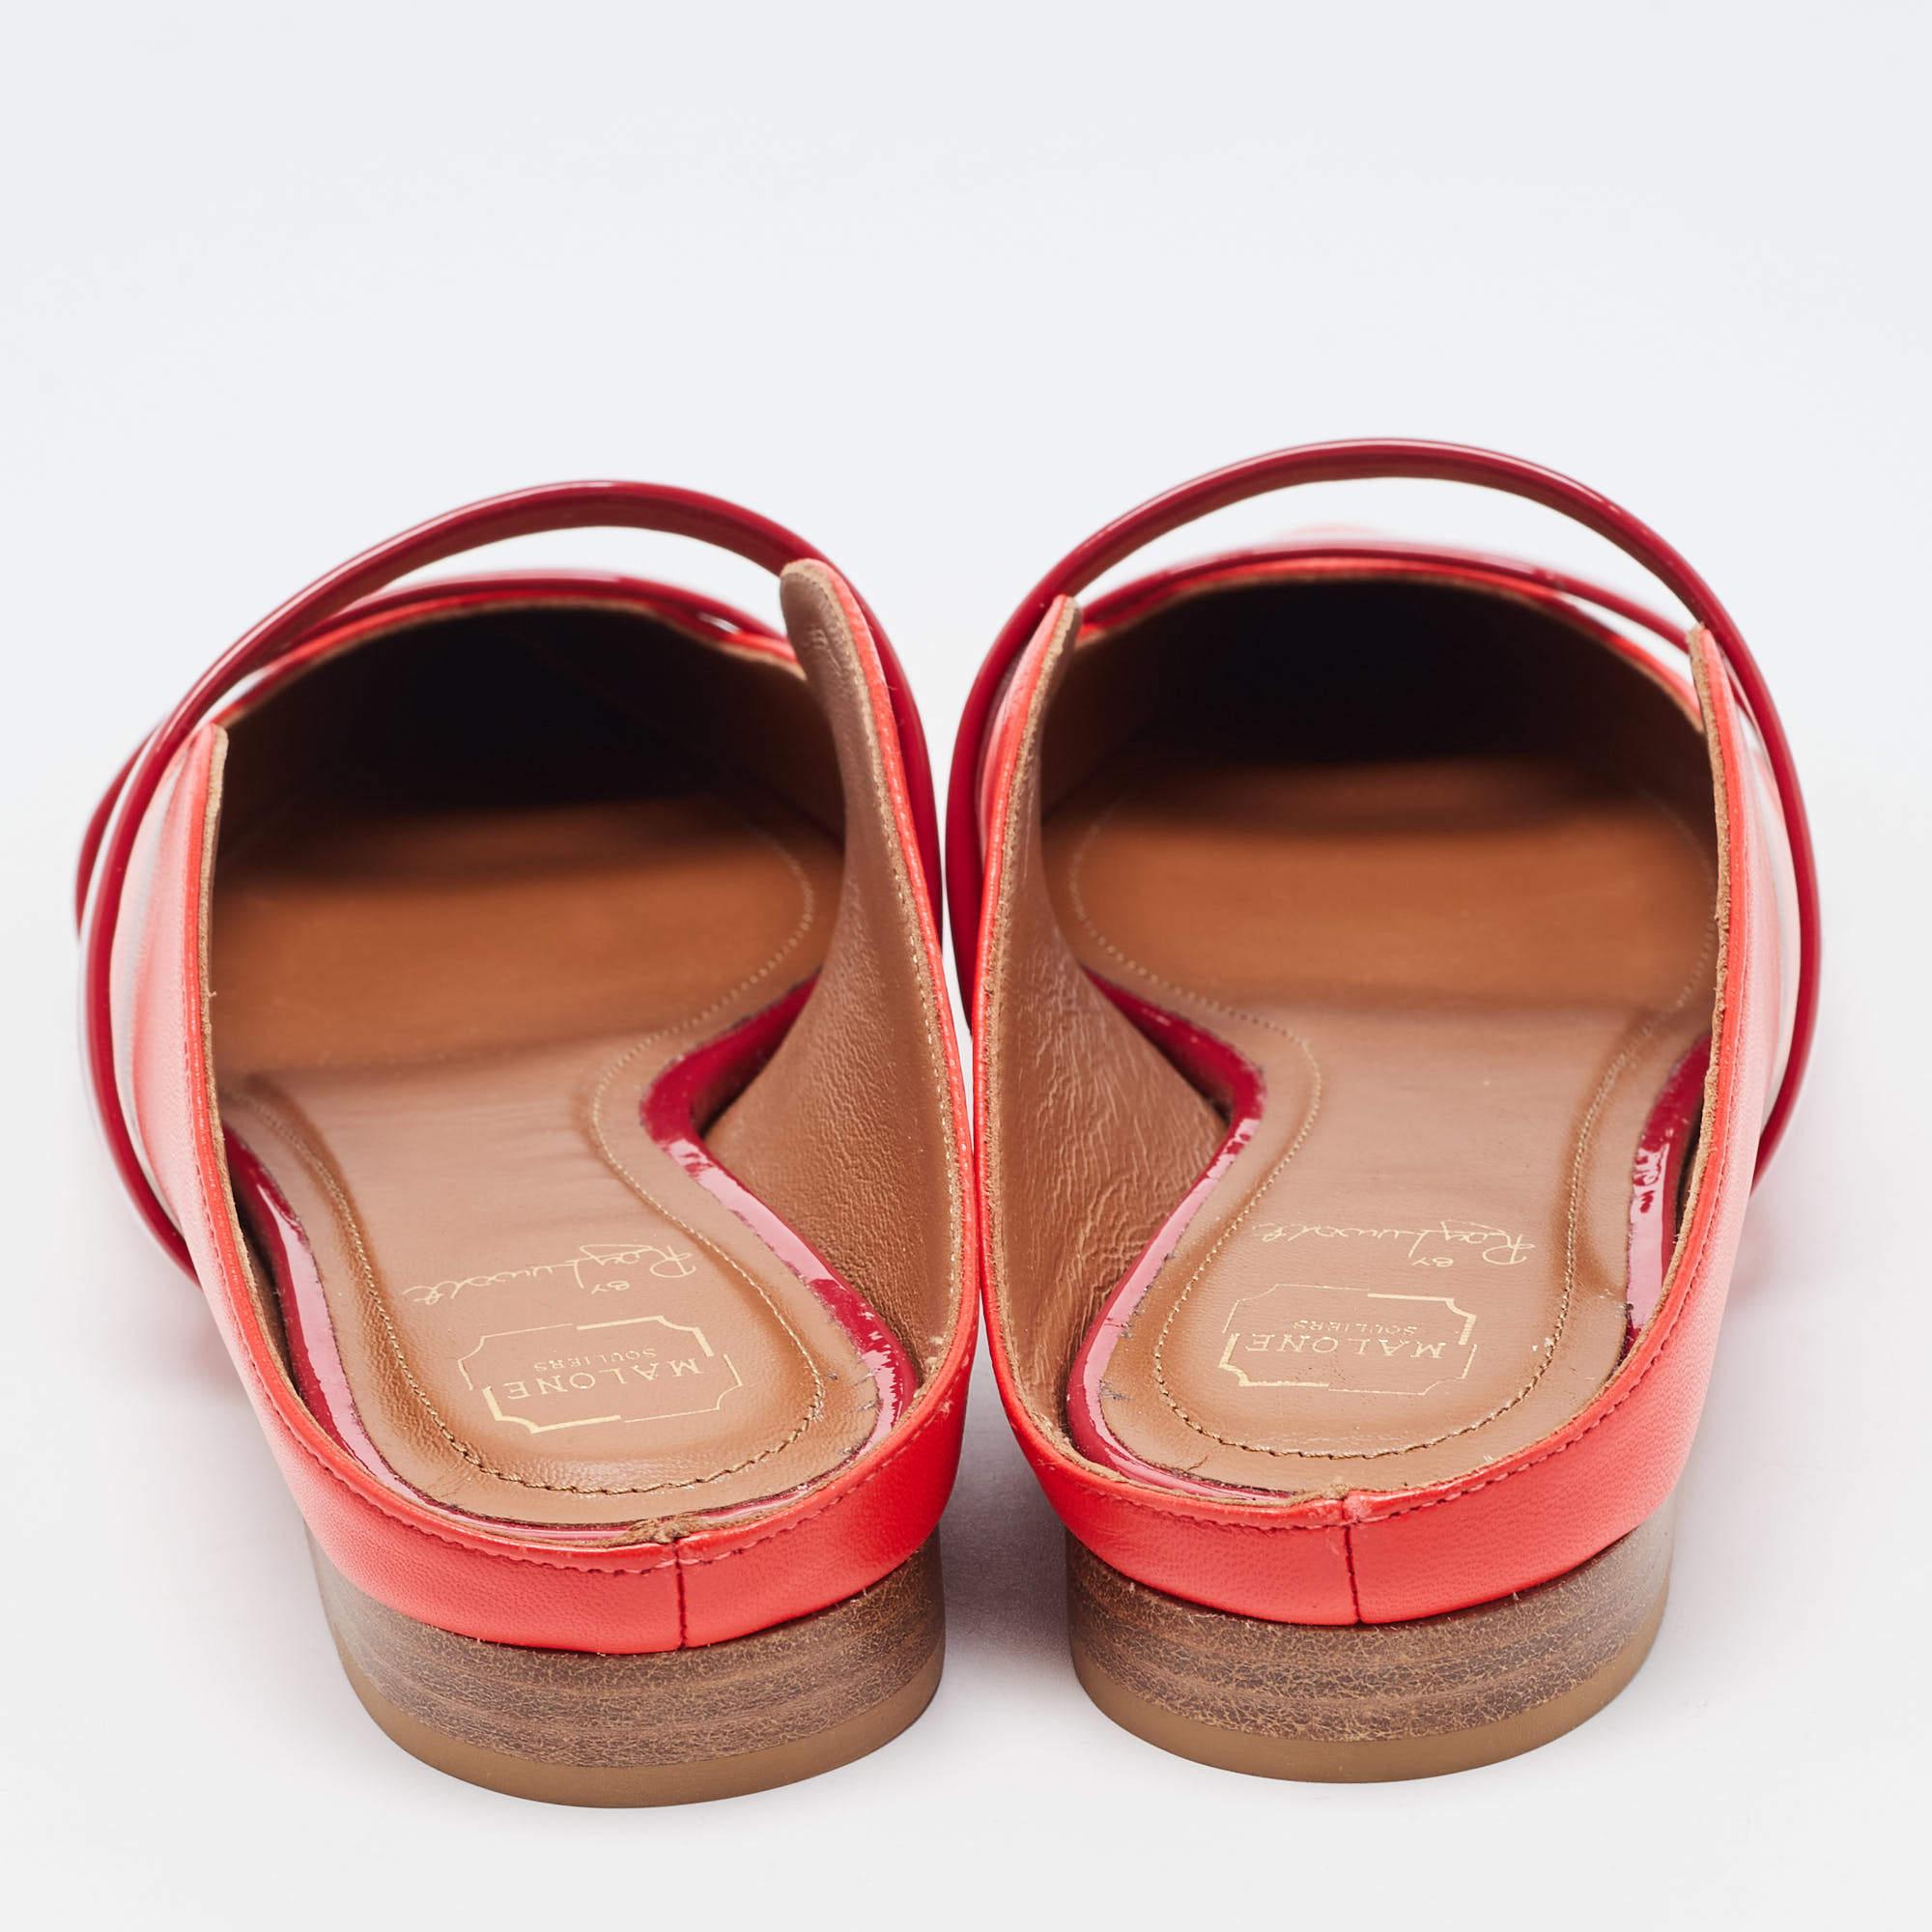 Malone Souliers Red Leather Maureen Flat Mules Size 36 3